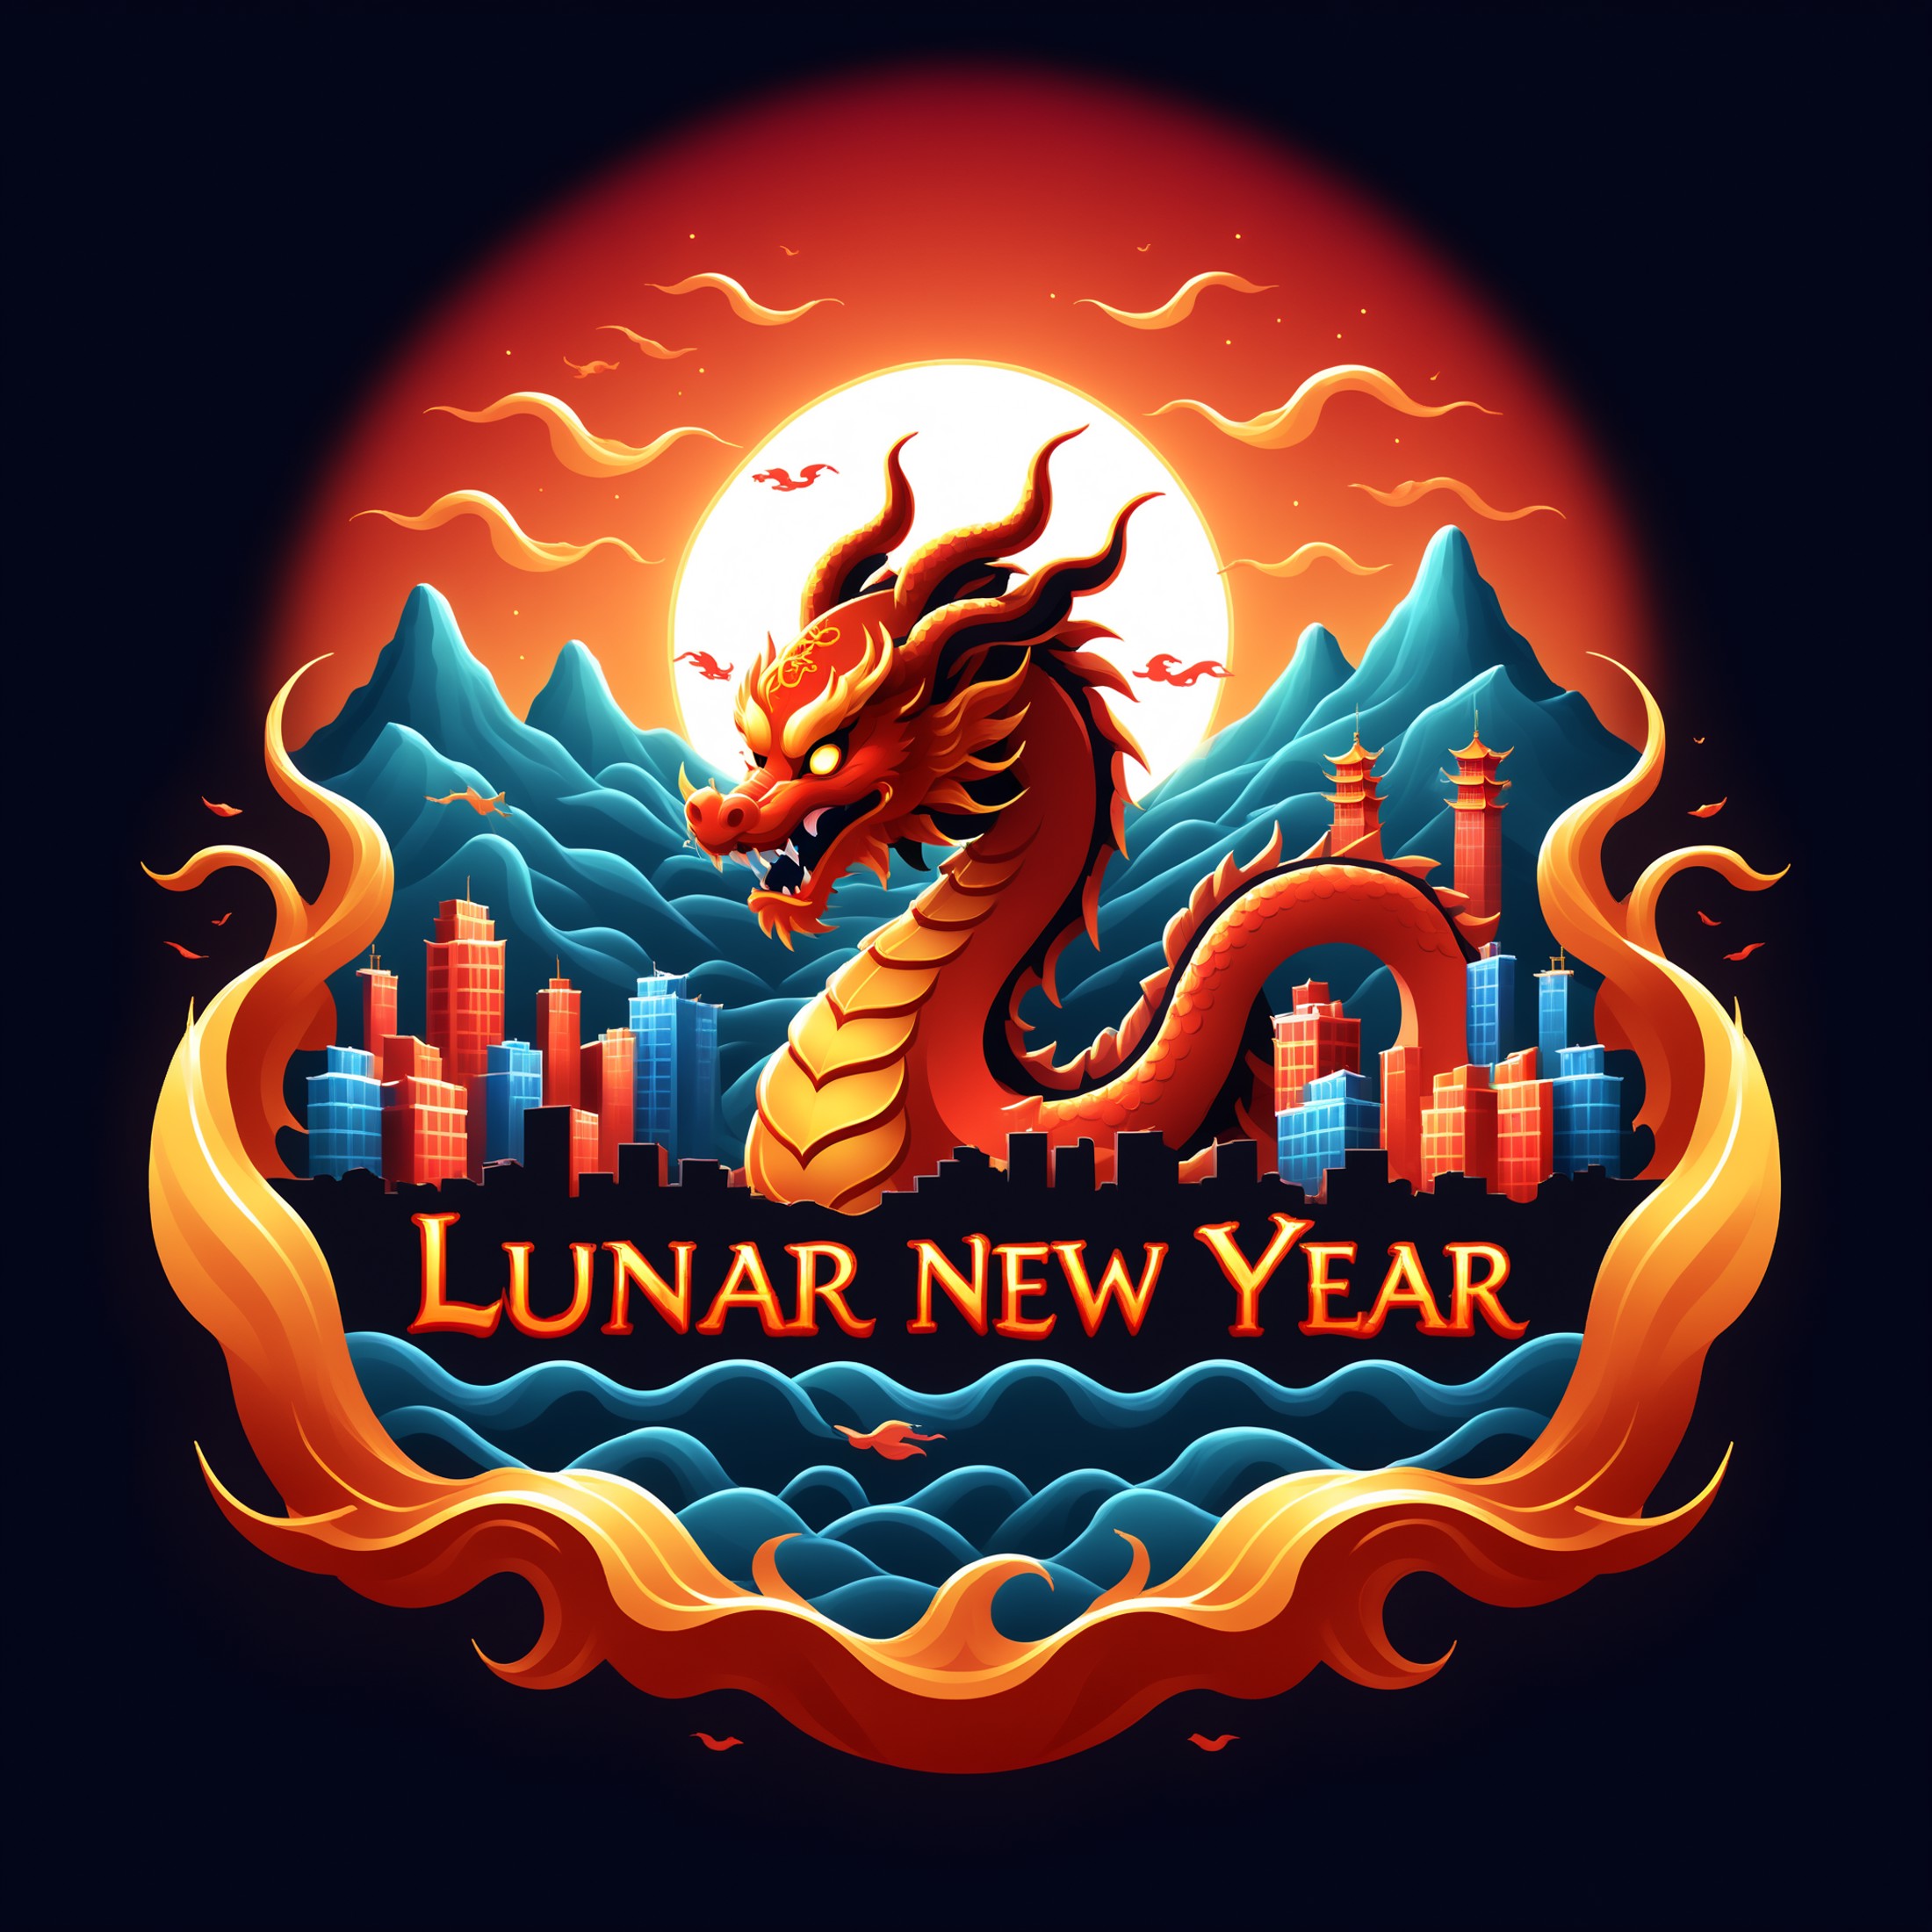 Lunar New Year text logo, wavy colors, simple, S1LK4RT Dragon, chinese cityscape, happy near year, vantablack background